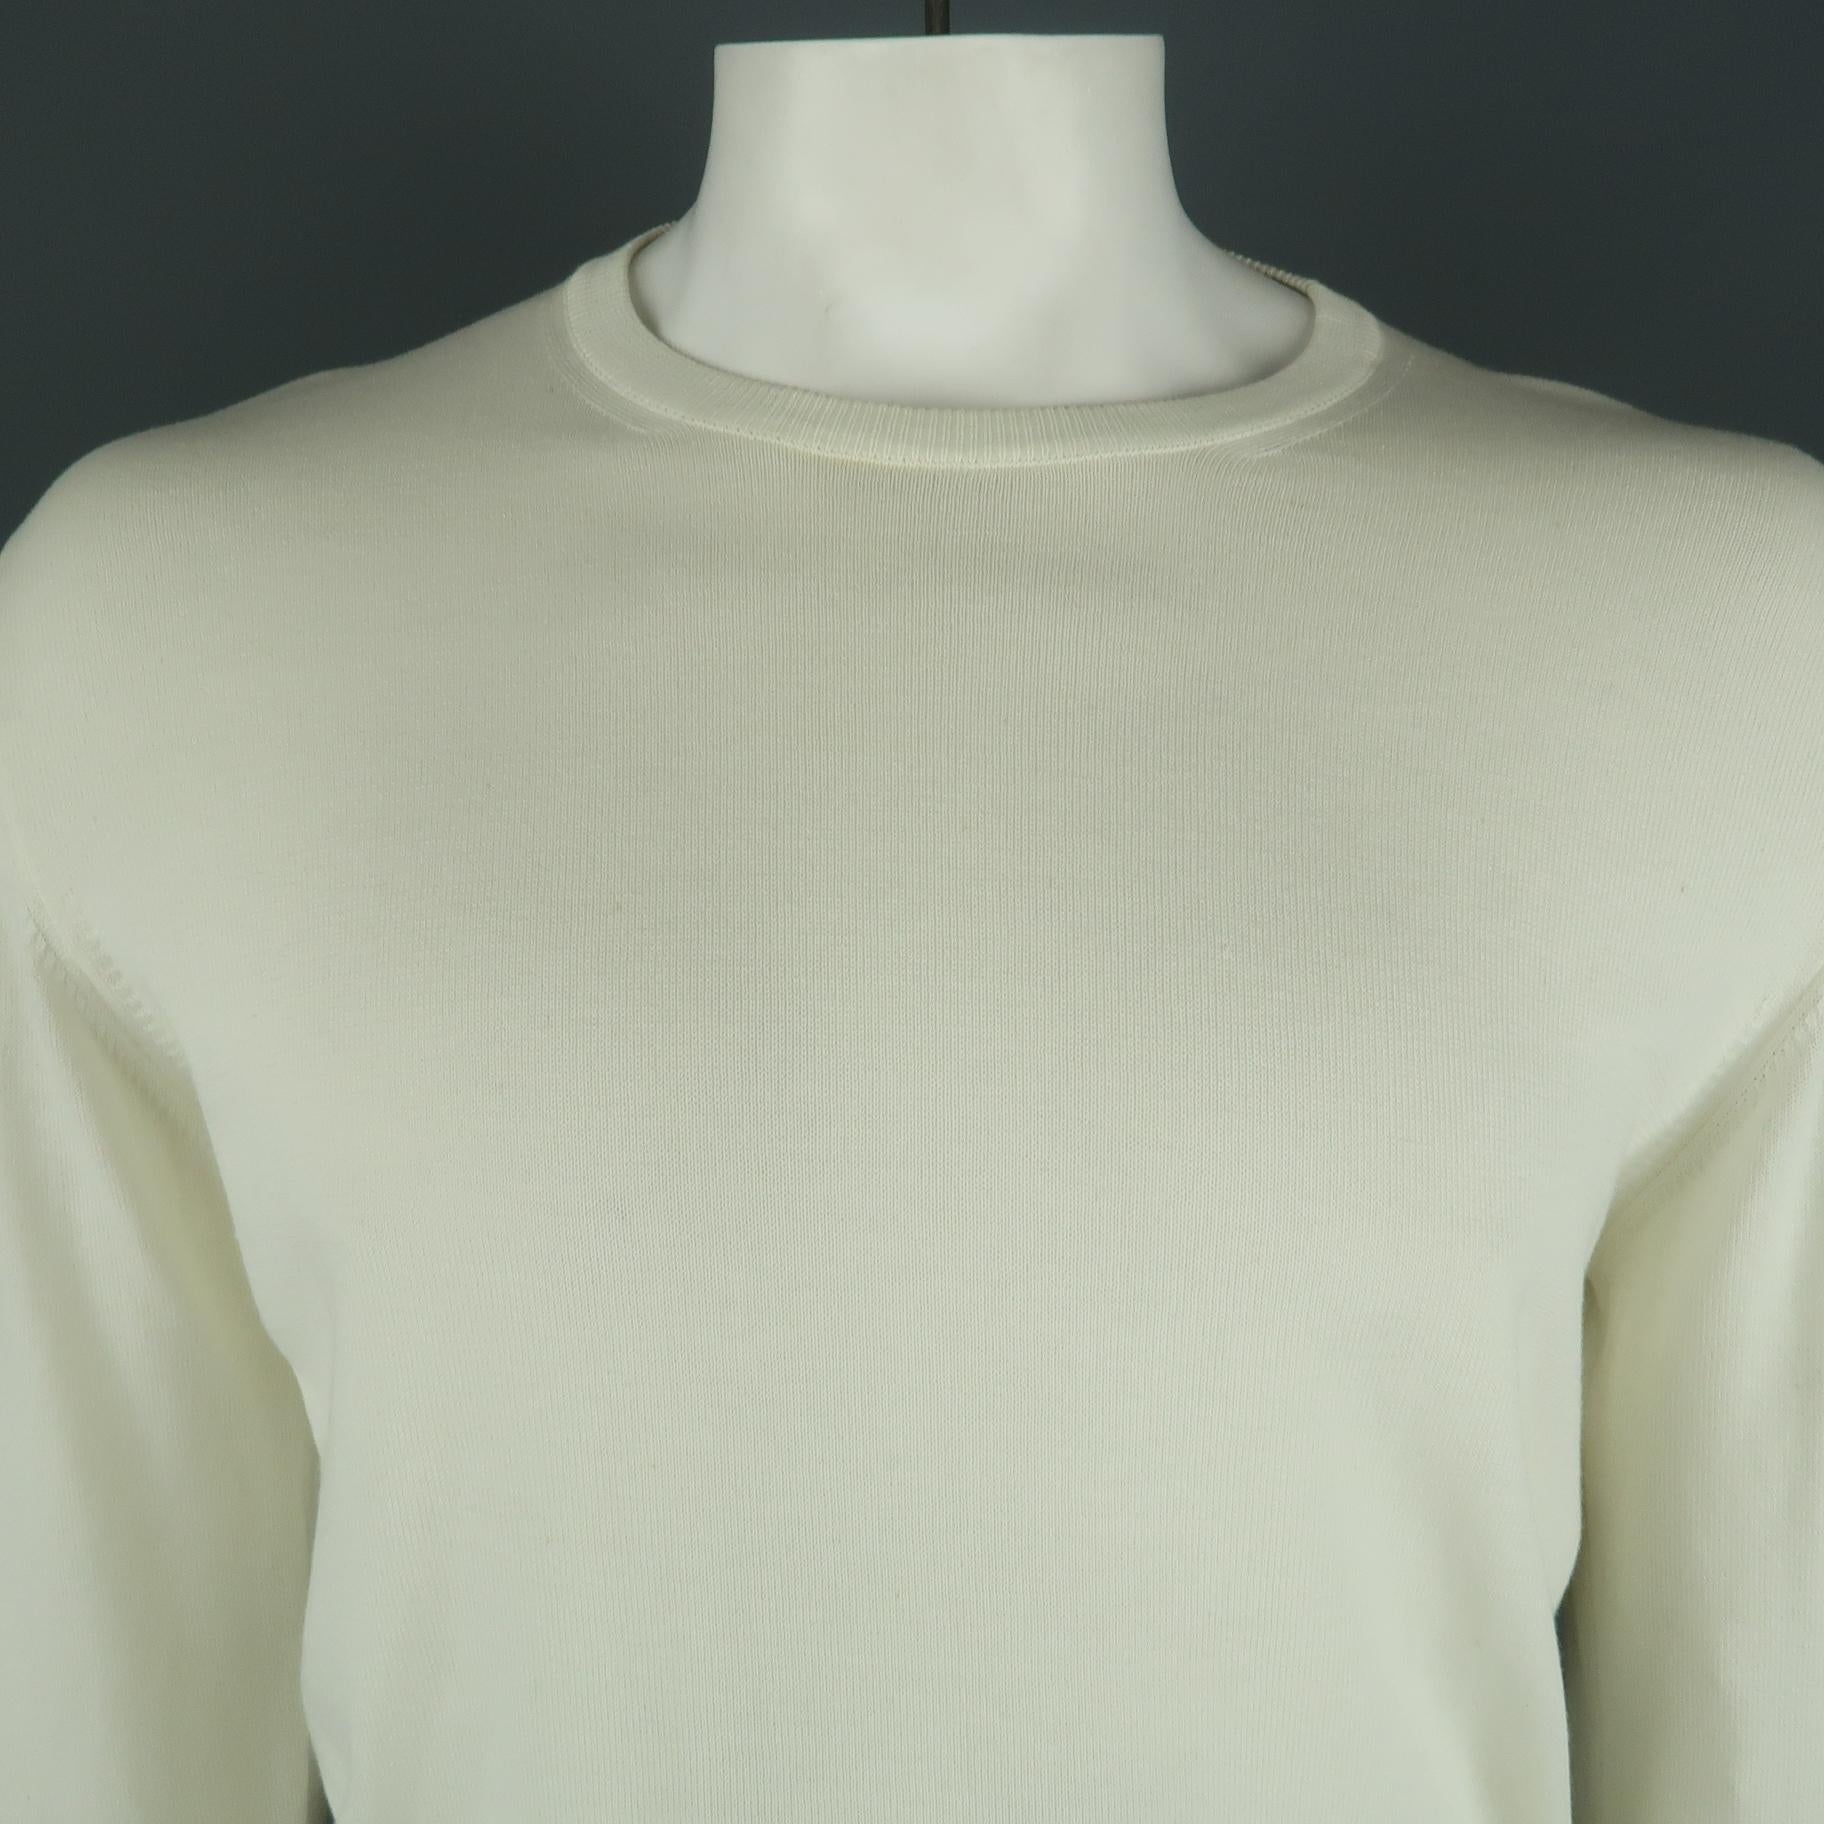 BORRELLI pullover comes in a beige cotton featuring a crew-neck style and stitch details around the arm. Made in Italy.
 
Excellent Pre-Owned Condition.
Marked: IT 52
 
Measurements:
 
Shoulder: 21 in.
Chest: 48 in.
Sleeve: 27 in.
Length: 27.5